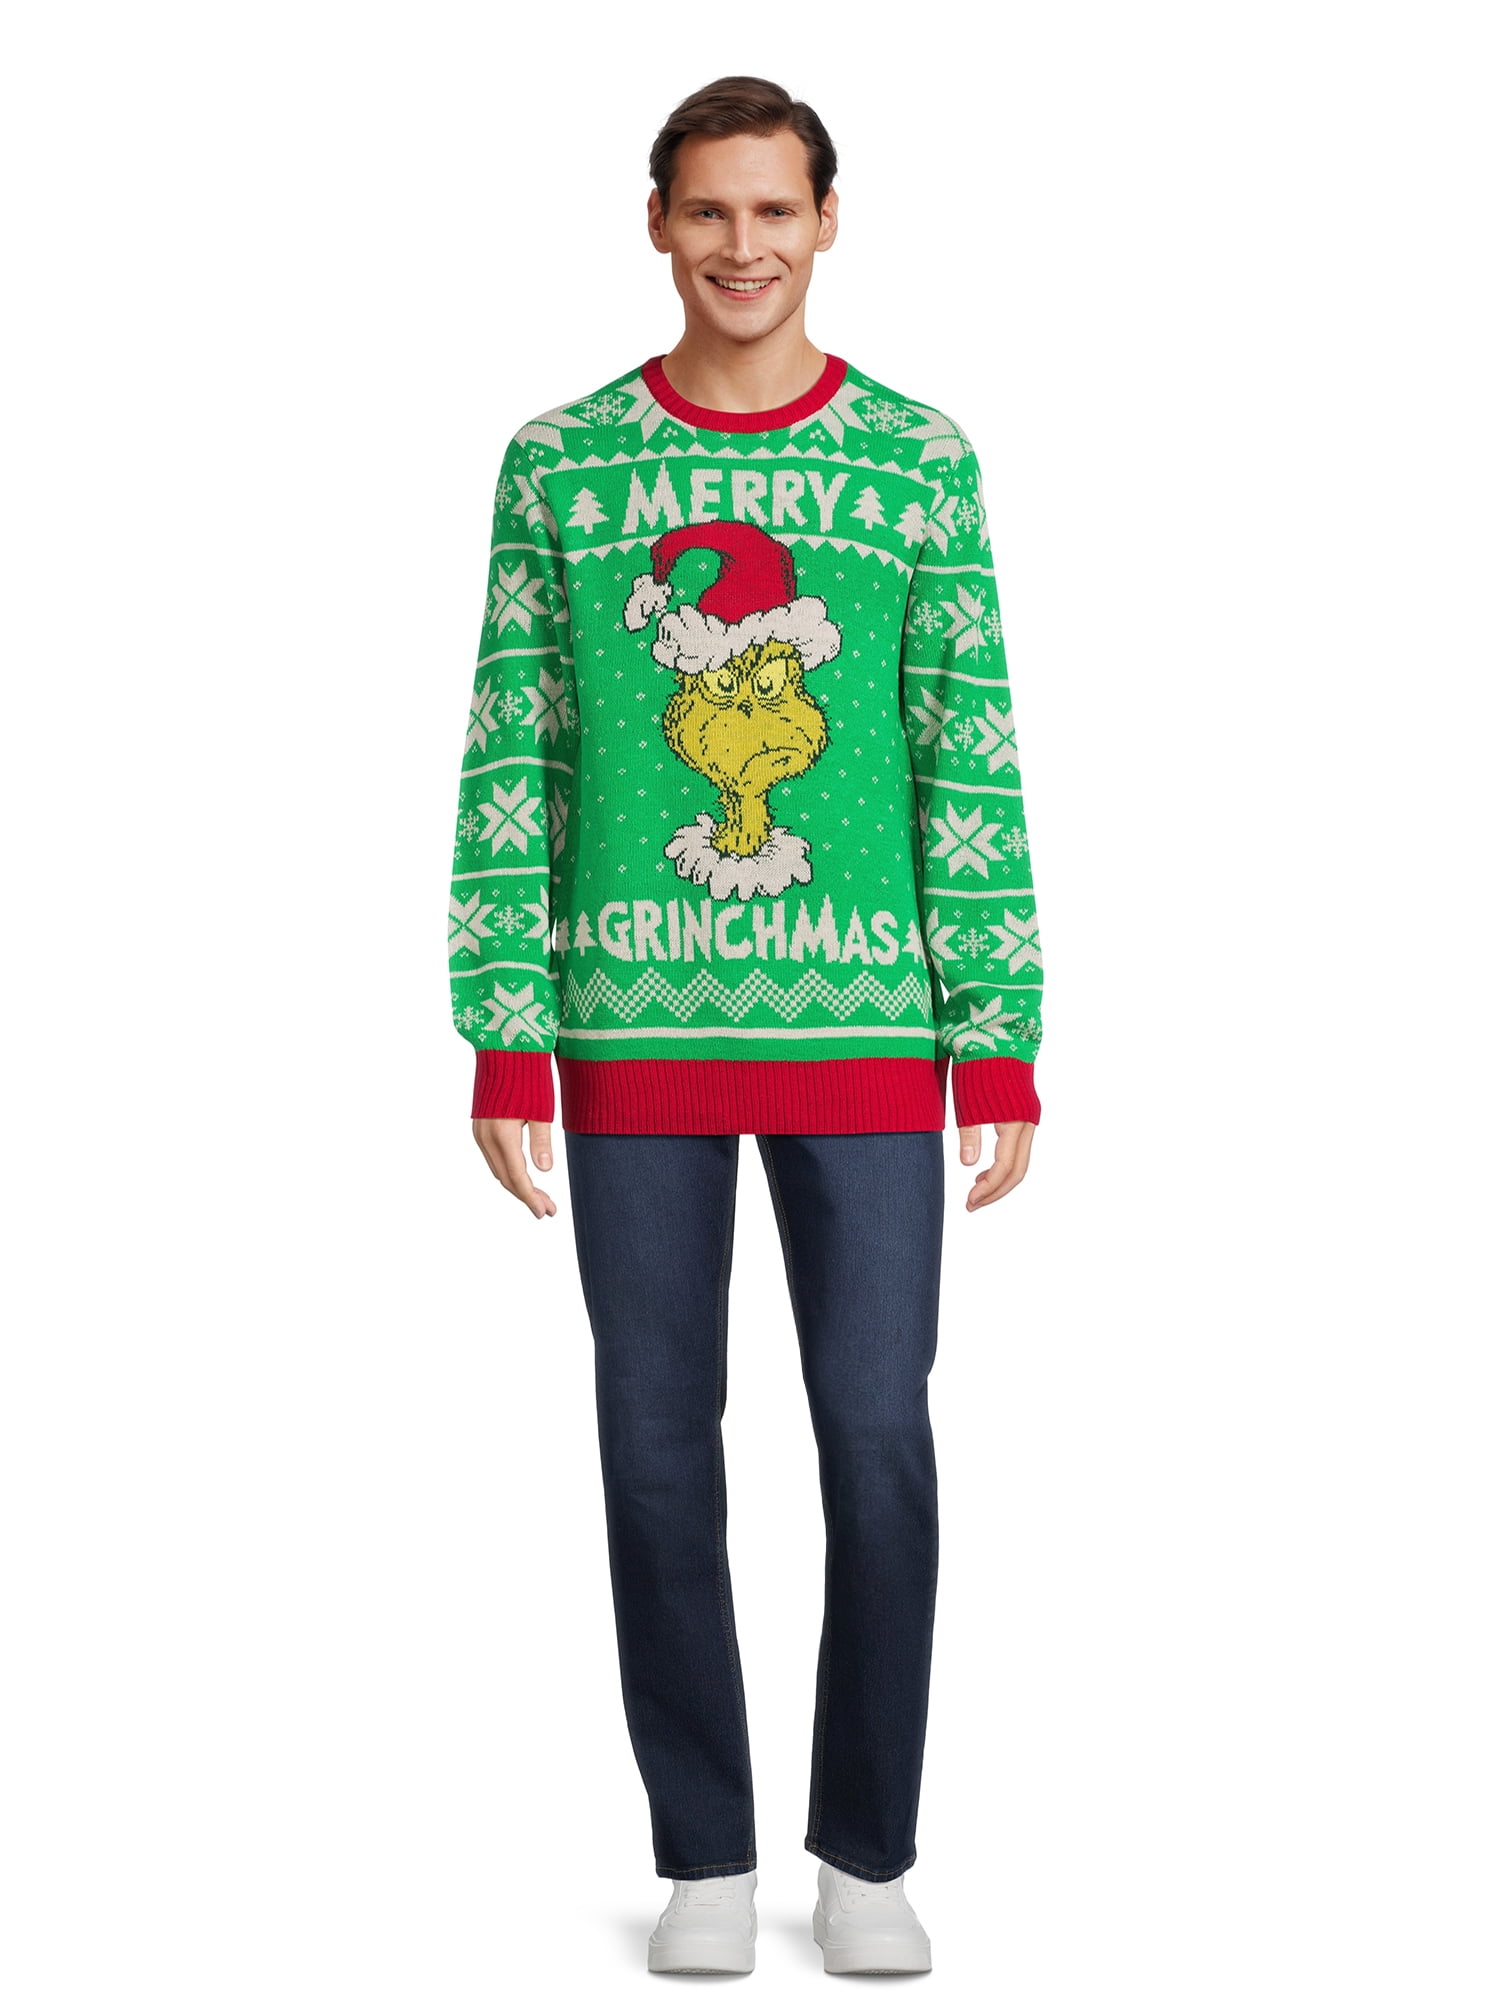 The Grinch Men's Merry Grinchmas Christmas Sweater with Long Sleeves, Sizes  S-3XL 